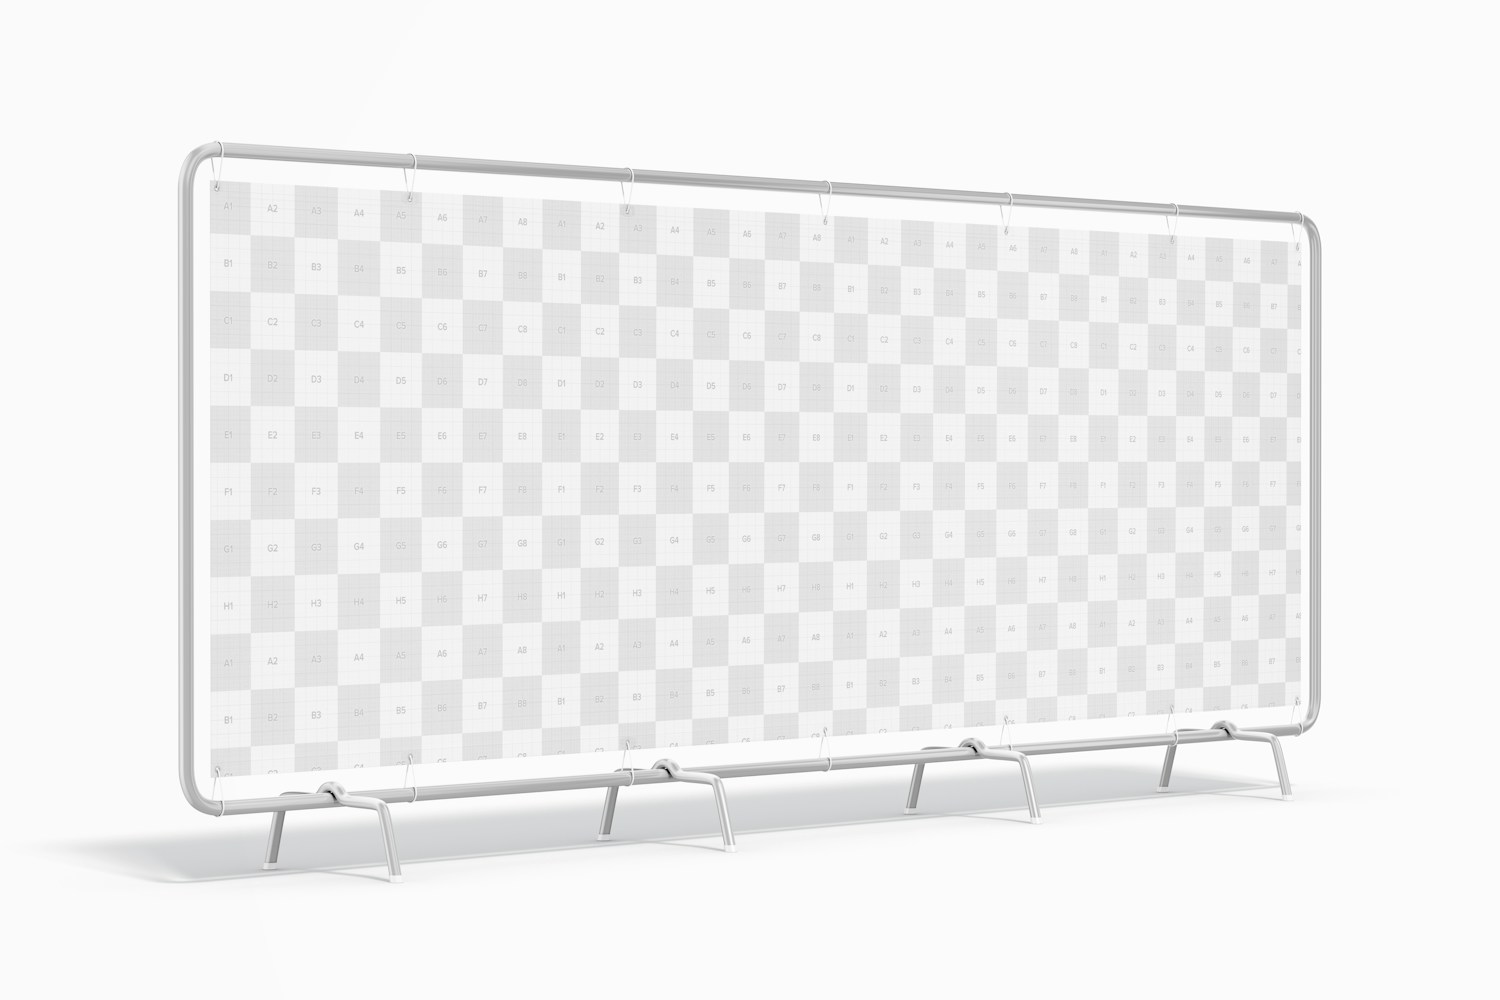 Giant Banner Mockup, Perspective